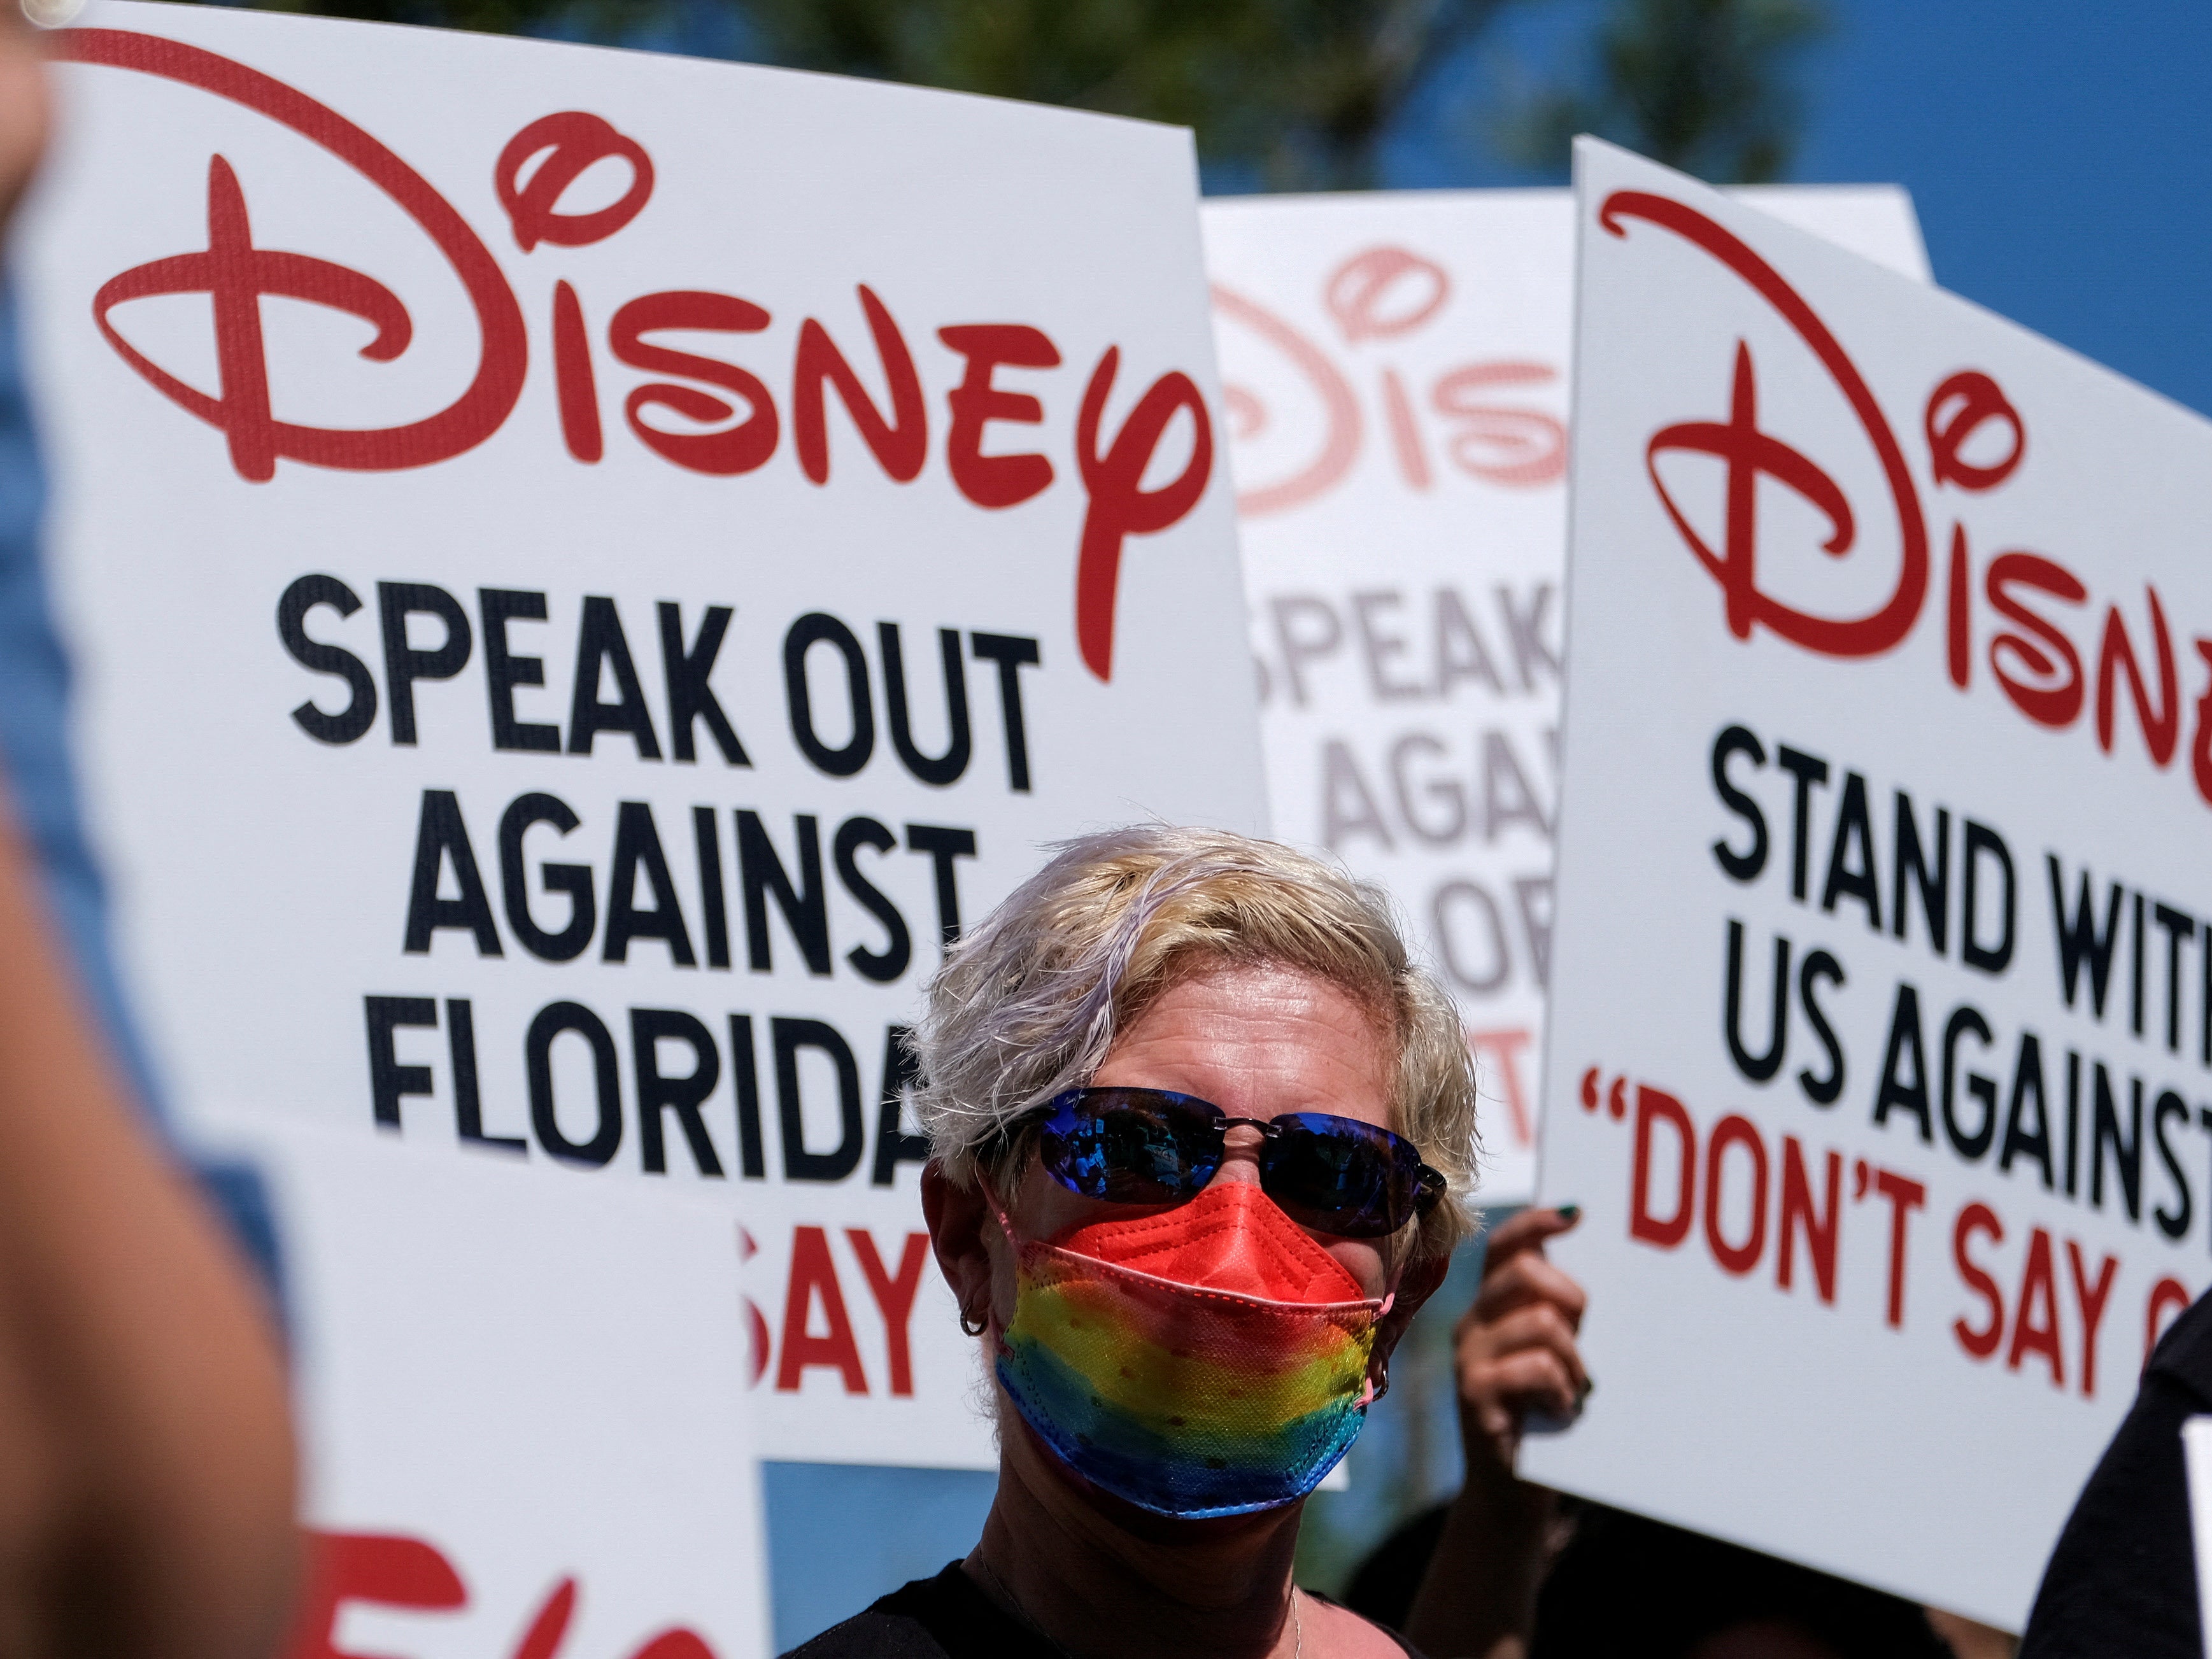 A demonstration by Disney employees in California